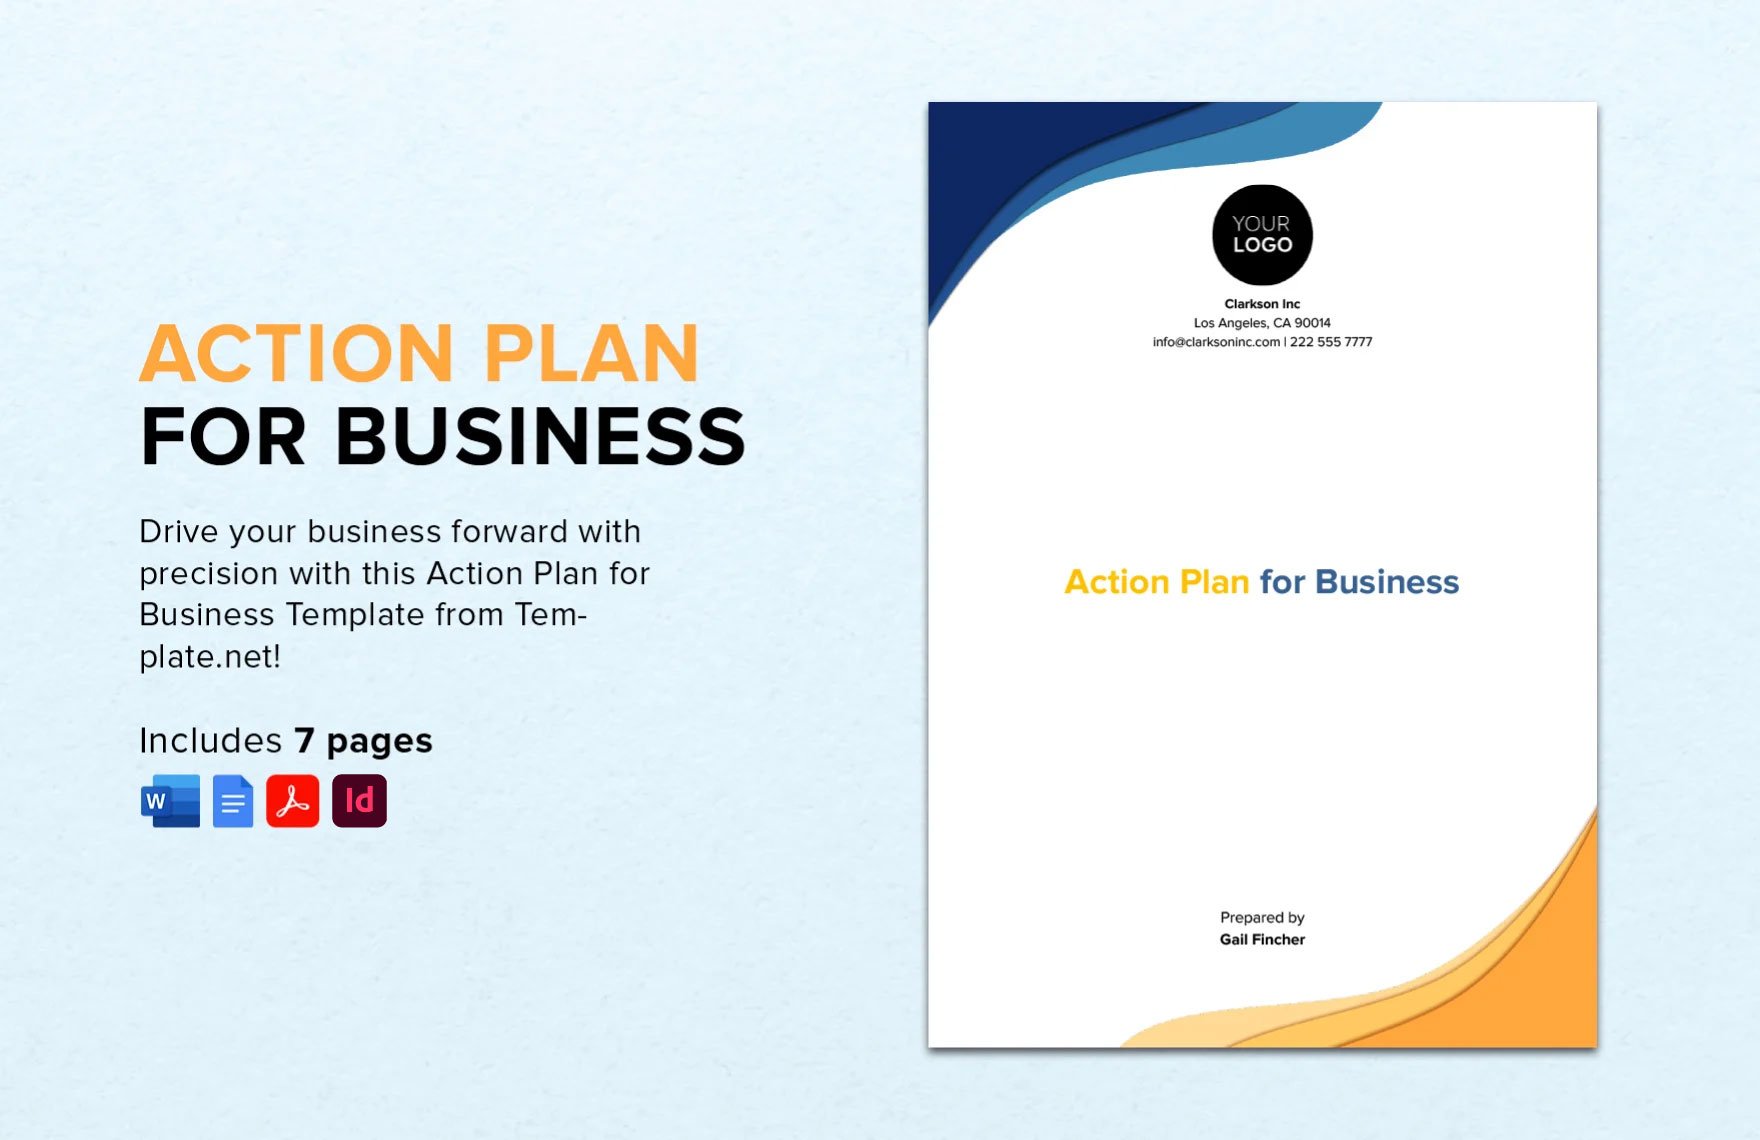 Action Plan for Business Template in Word, Google Docs, PDF, InDesign